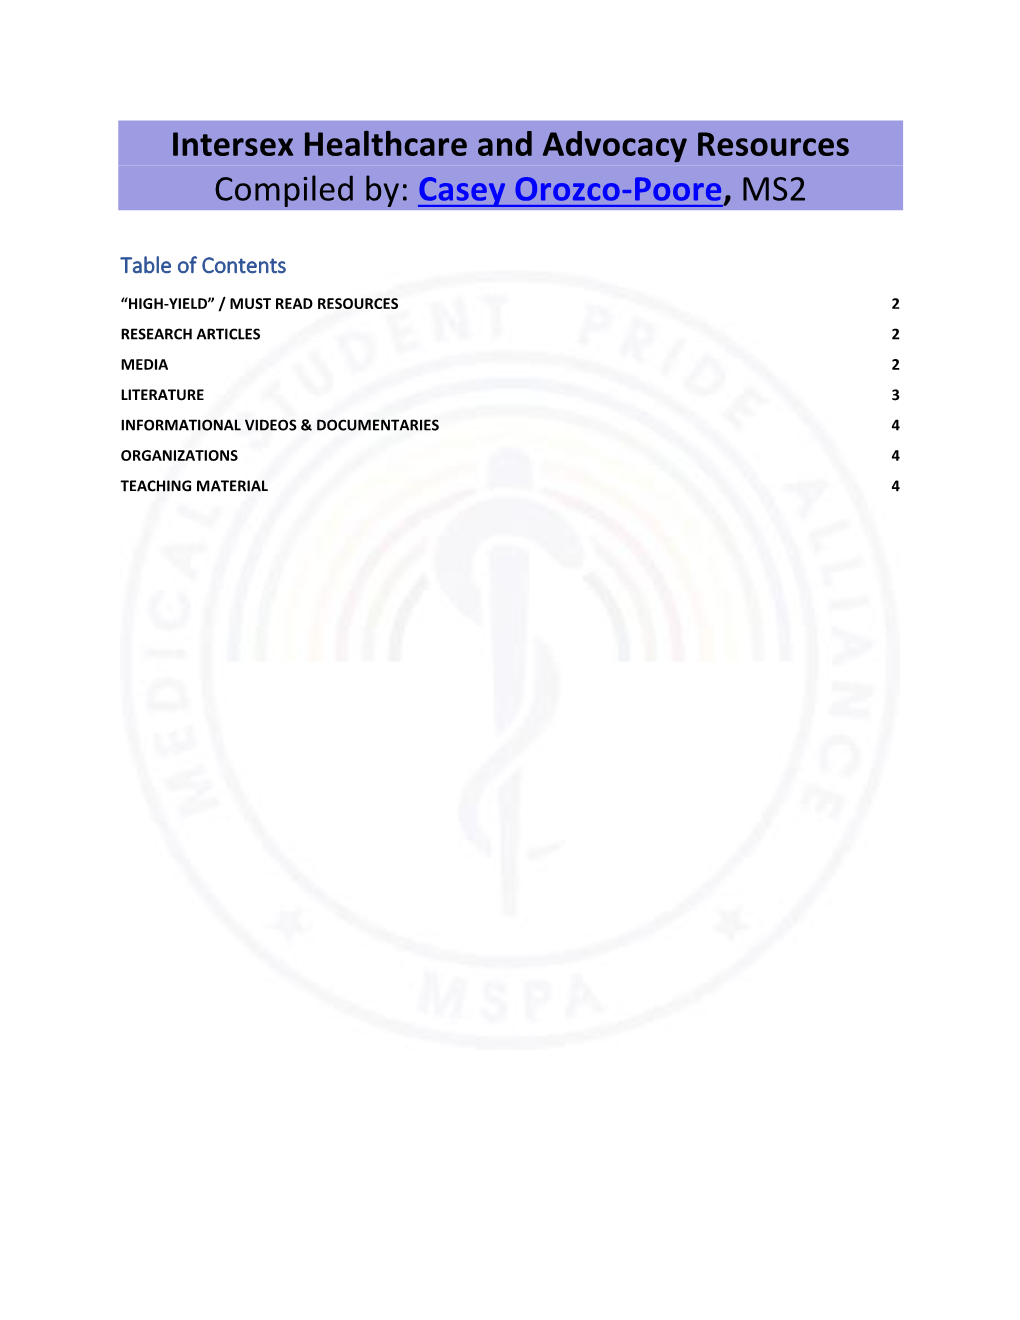 Intersex Healthcare and Advocacy Resources Compiled By: Casey Orozco-Poore, MS2